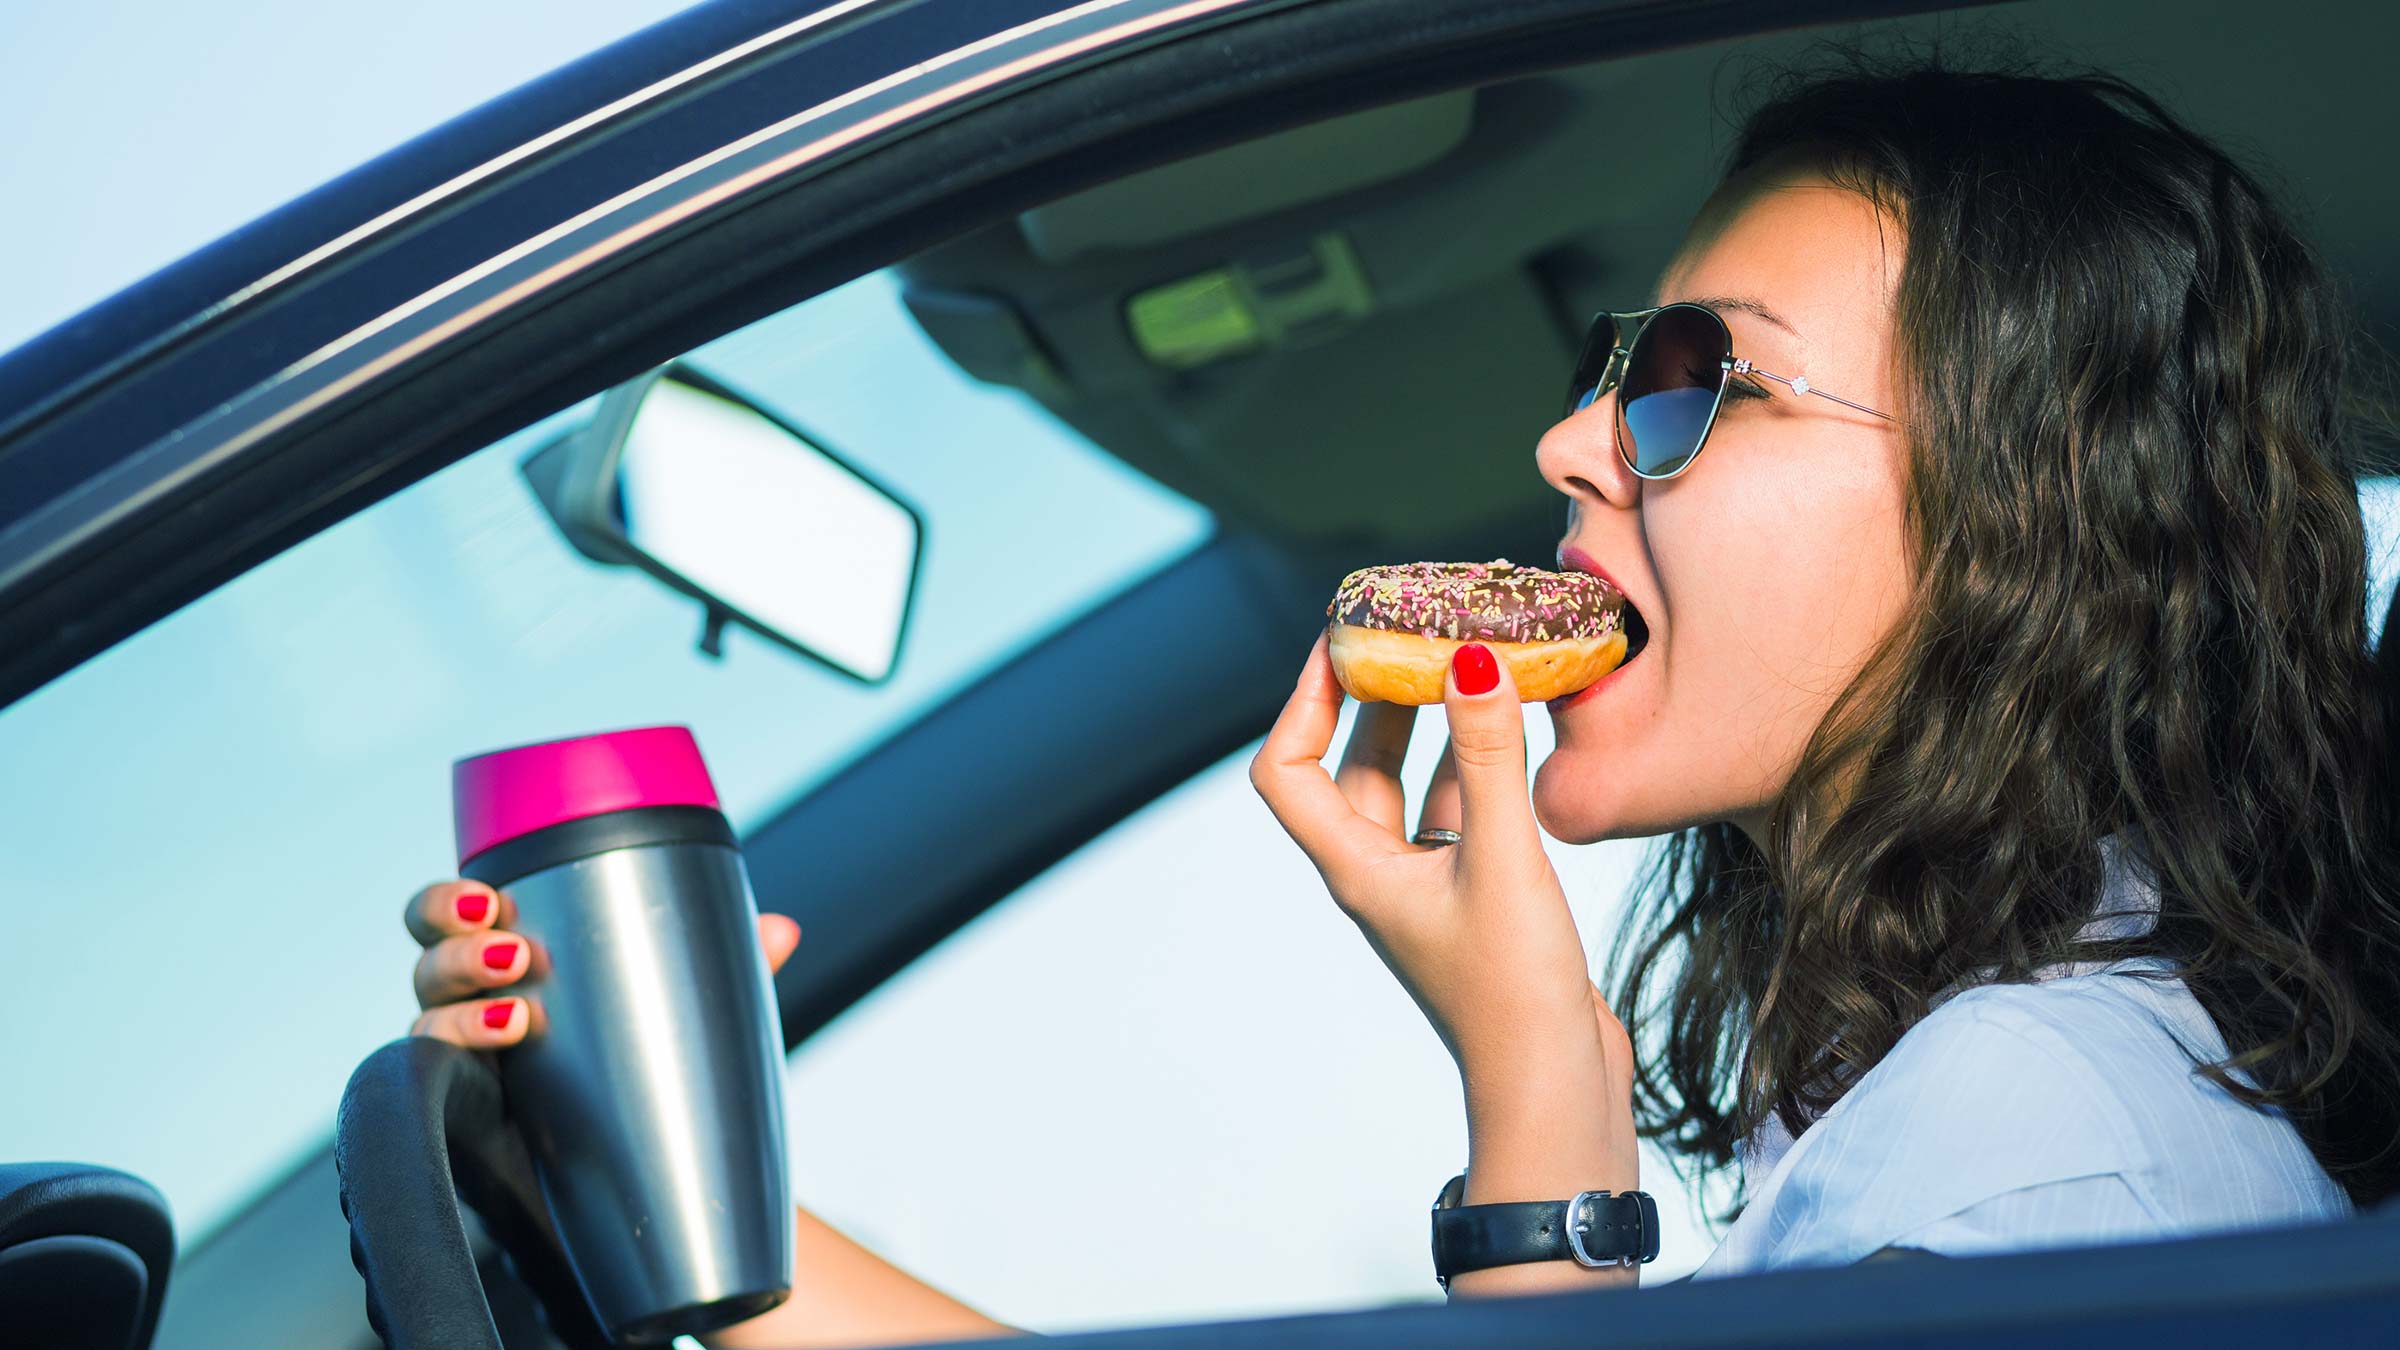 women eating and holding a water bottle while driving